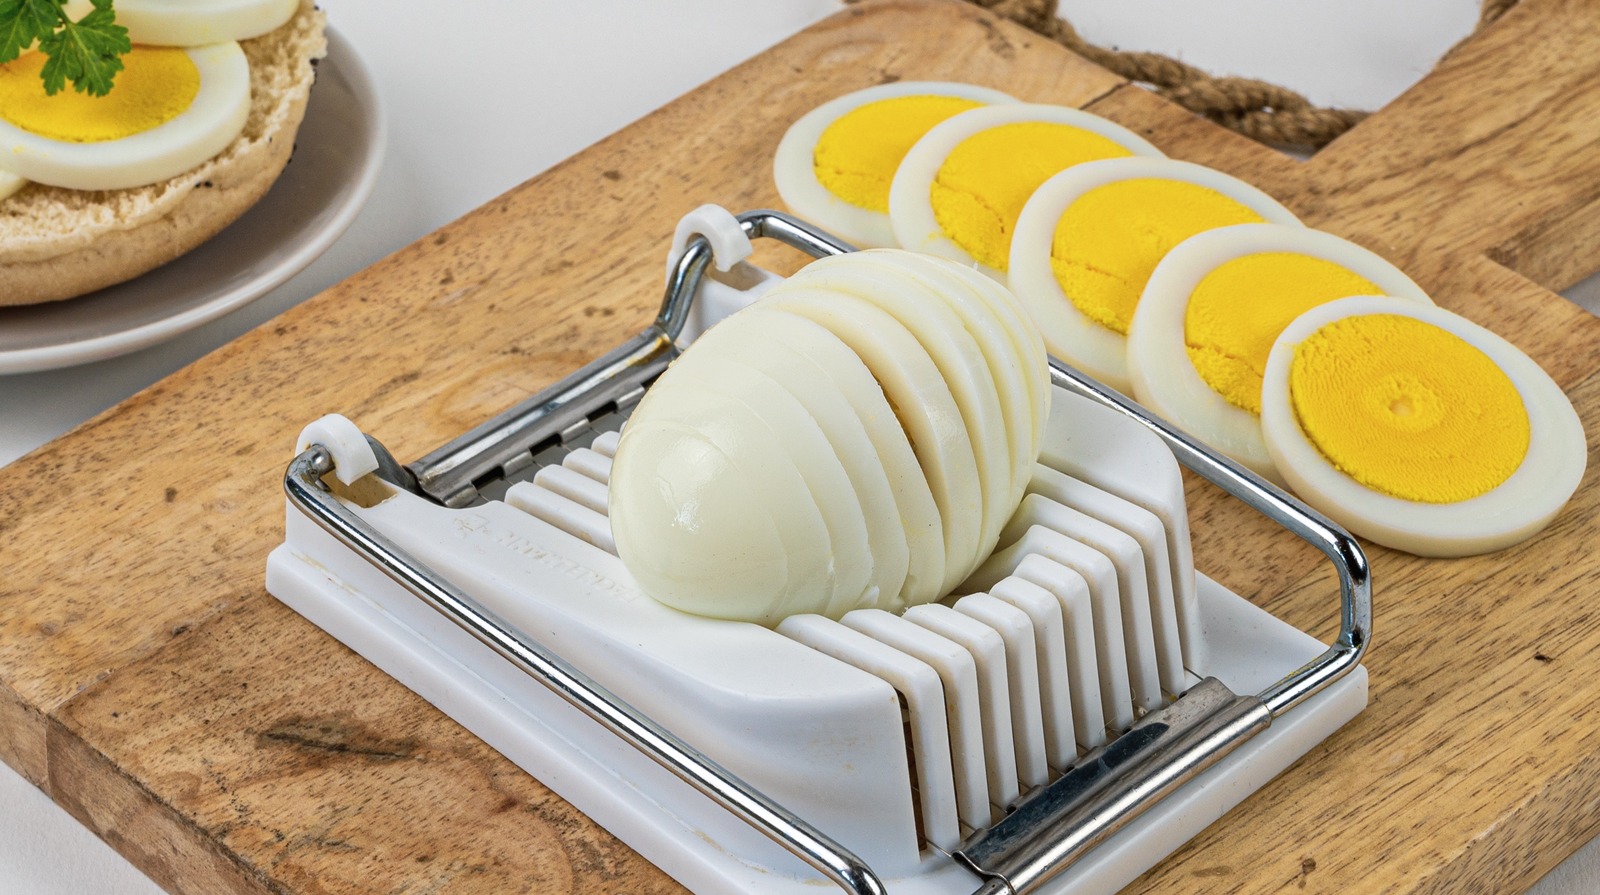 https://www.thedailymeal.com/img/gallery/the-easy-egg-slicer-hack-you-should-start-using/l-intro-1668449319.jpg